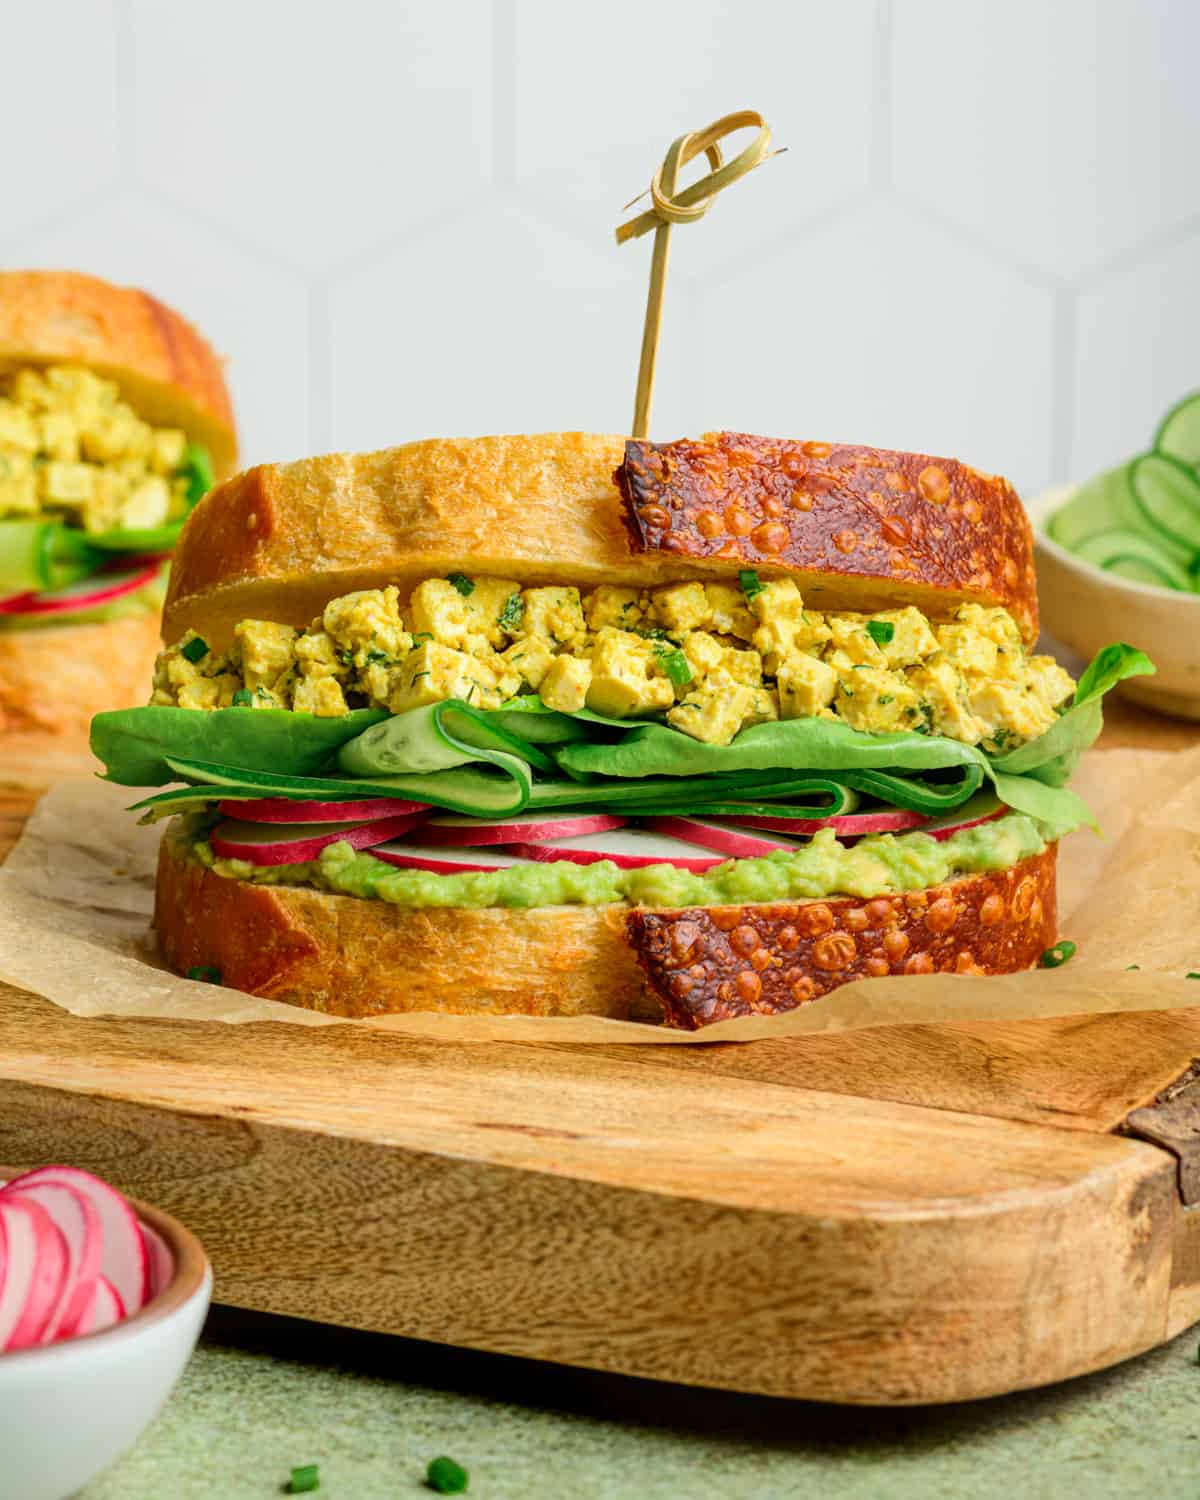 Side view of vegan egg salad sandwich on a wooden cutting board.